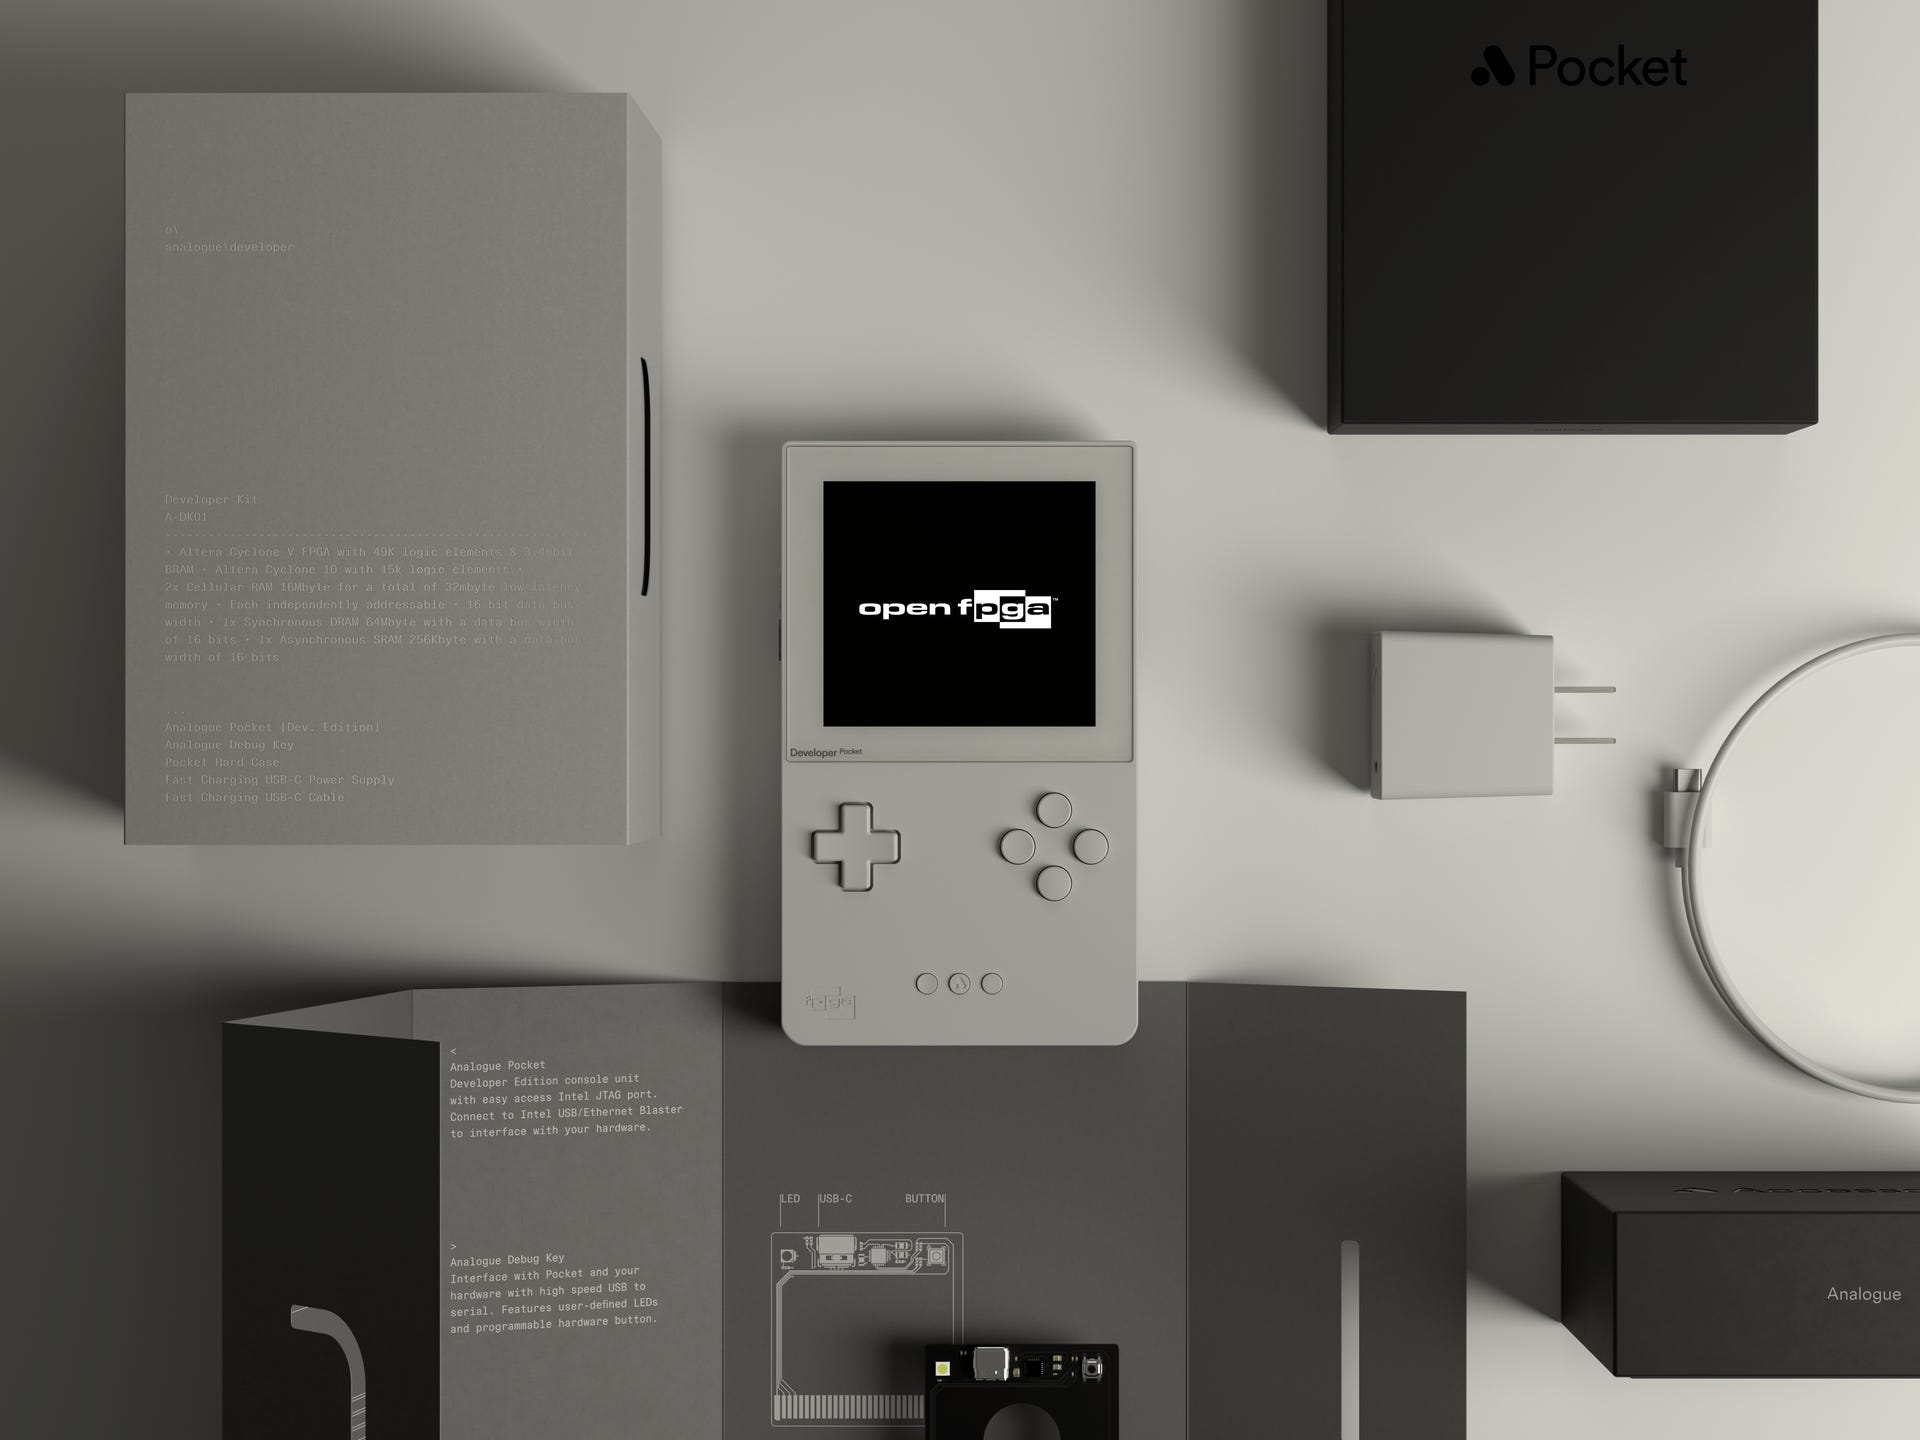 With its latest update, the luxury Game Boy replica Analogue